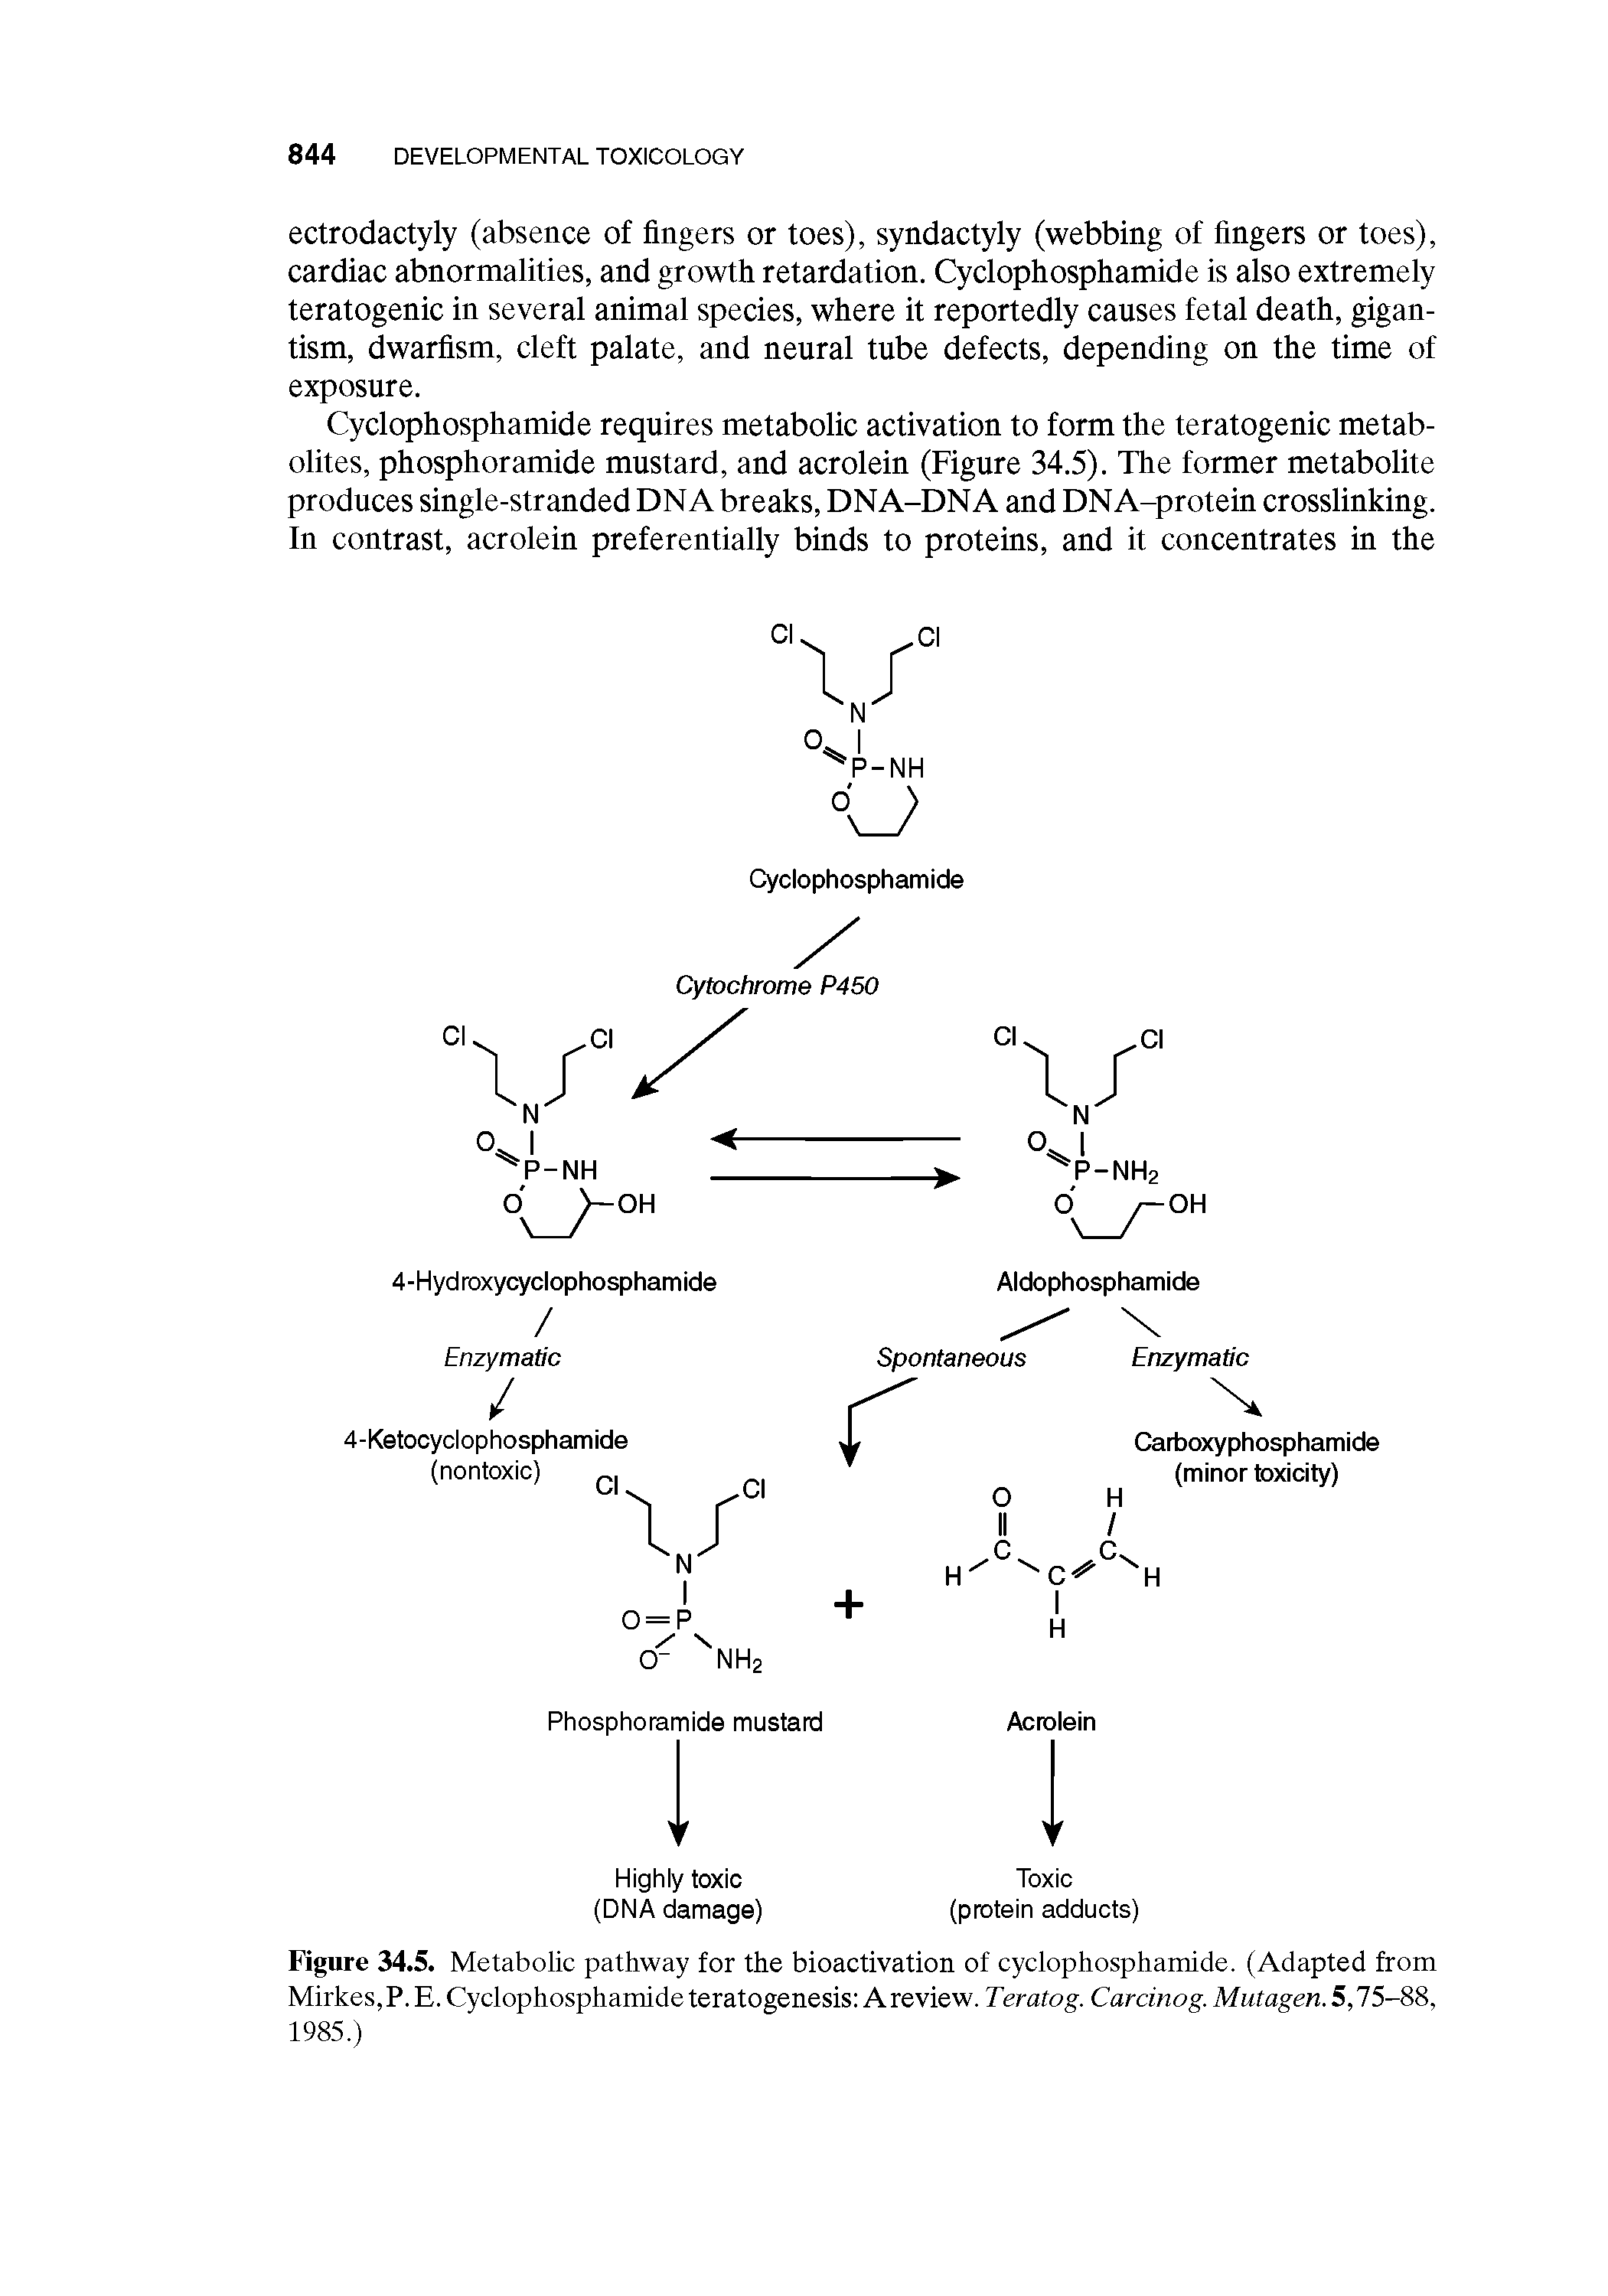 Figure 34.5. Metabolic pathway for the bioactivation of cyclophosphamide. (Adapted from Mirkes,P. E. Cyclophosphamide teratogenesis A review. Teratog. Carcinog. Mutagen. 5,75-88, 1985.)...